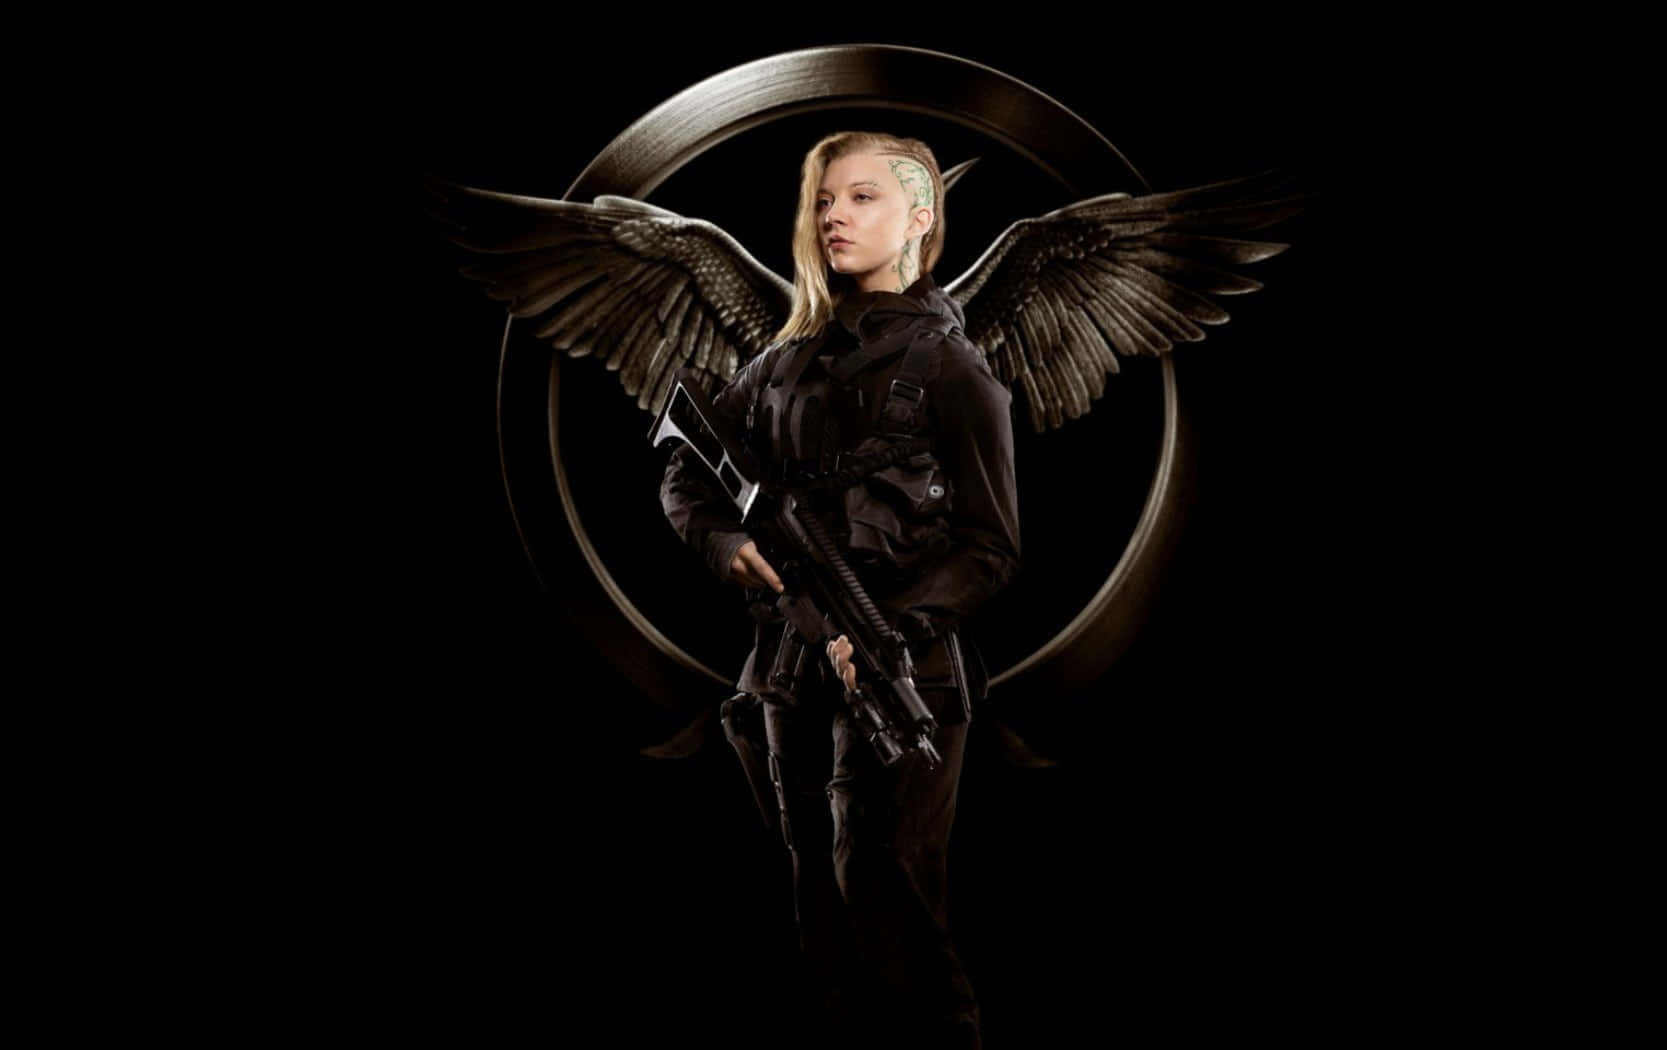 Katniss Everdeen courageously takes on the Hunger Games